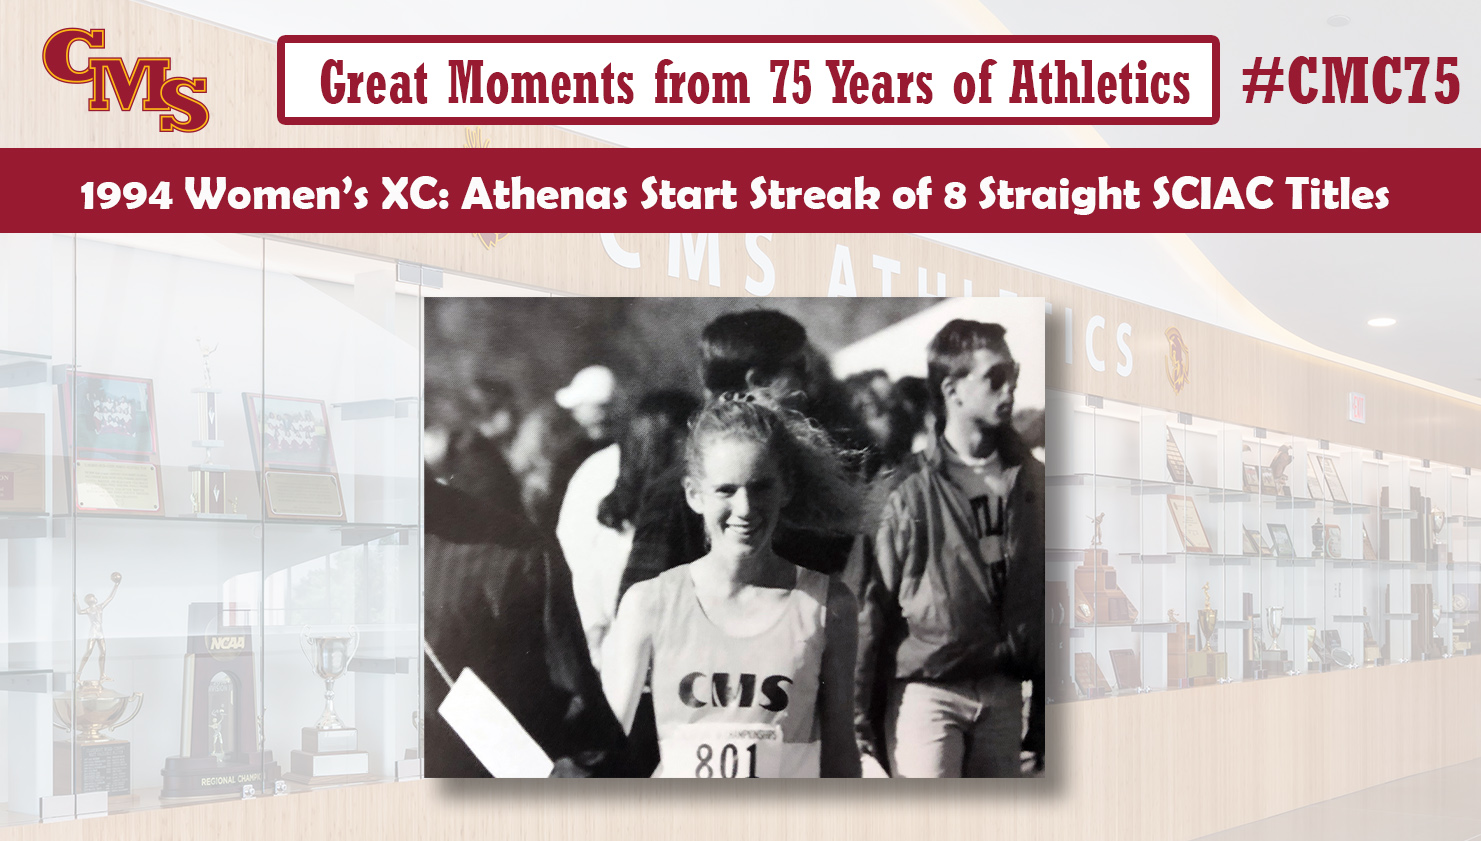 Jen Stuart smiling after the NCAA Championships. Words over the photo read: Great Moments from 75 Years of Athletics, 1994 Women's XC: Athenas Start Streak of 8 Straight SCIAC Titles